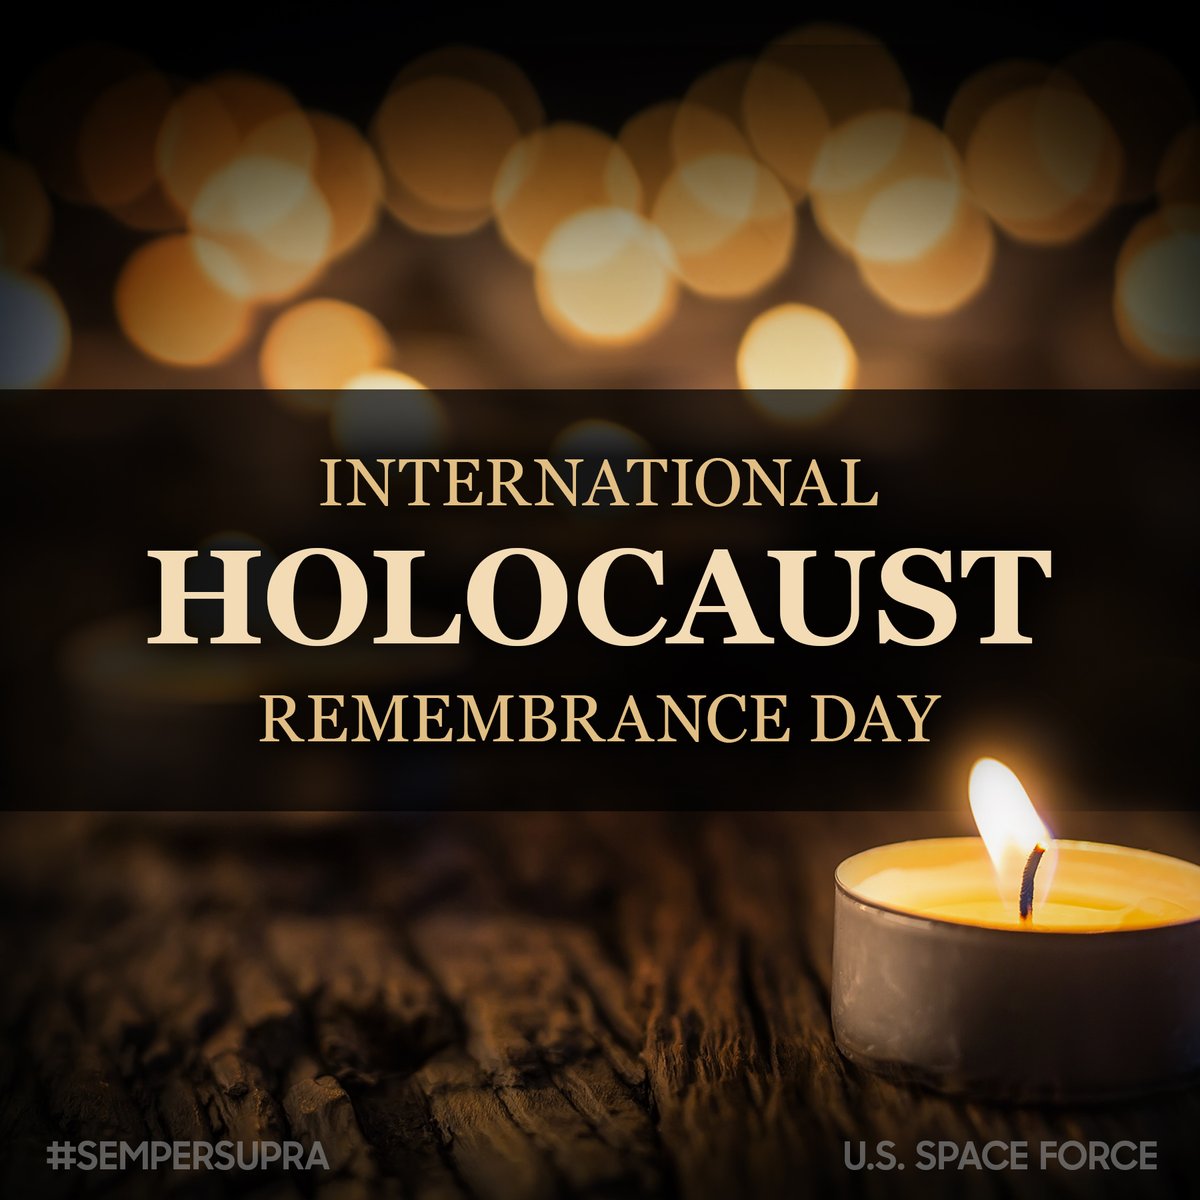 Today is International Holocaust Remembrance Day. Never forget the innocent lives lost. https://t.co/M17YFoY6Za